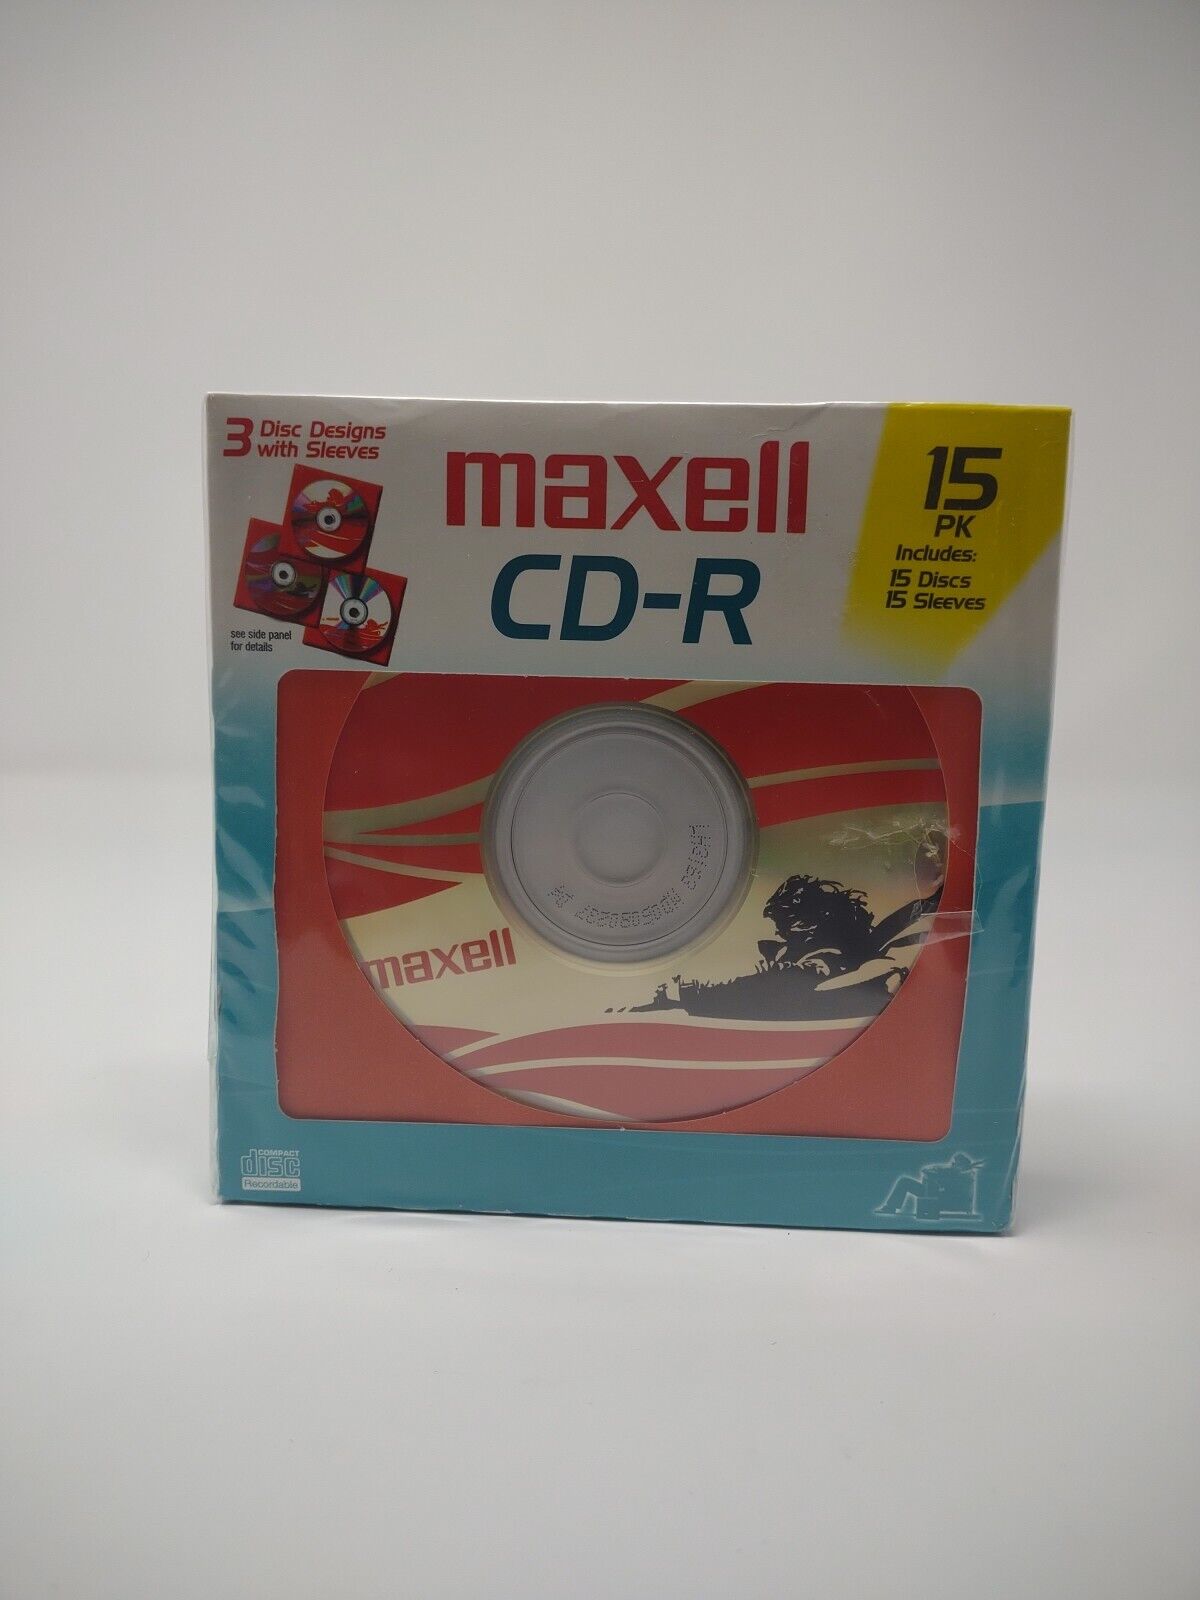 Maxell CD-R Discs & Sleeves 15 Pack NEW Old Stock